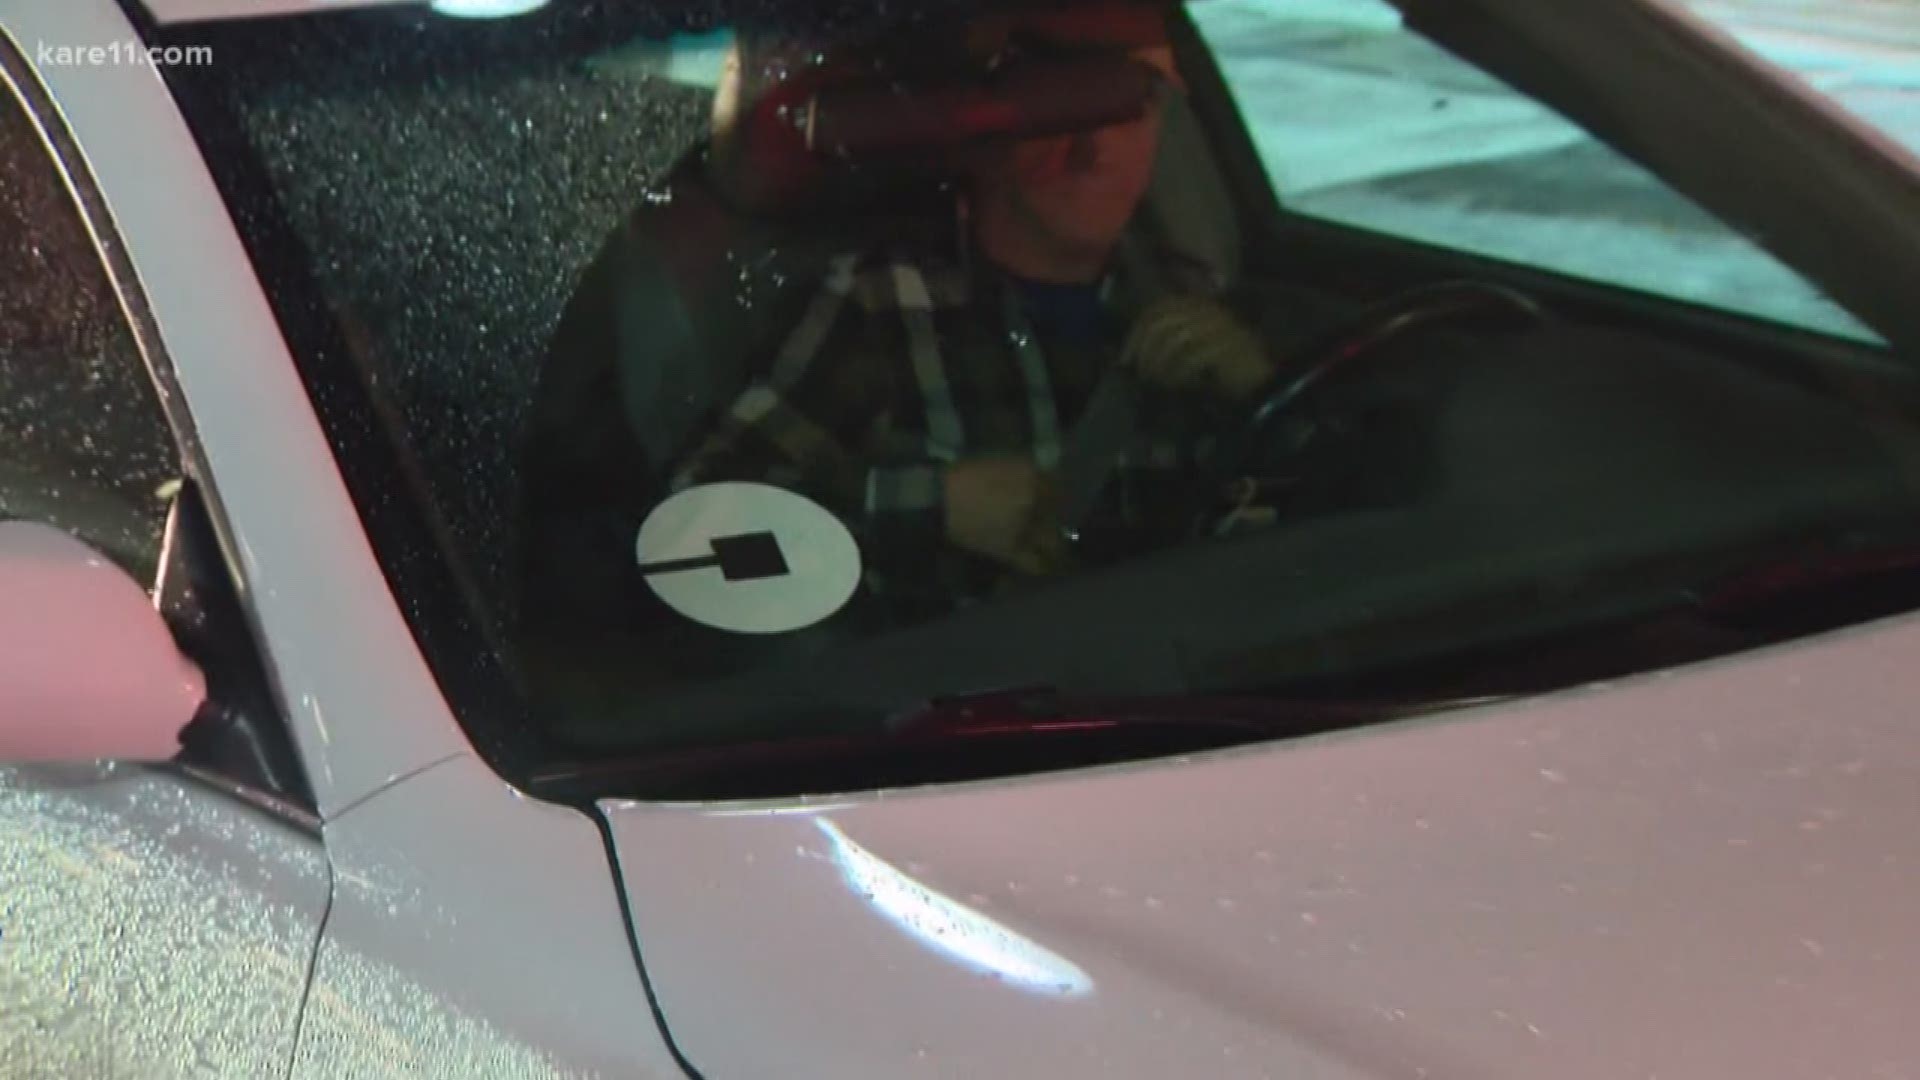 Have you ever considered taking on a "side hustle", like driving for a rideshare app? We wanted to find out how much you could really make doing that, so KARE 11's Kiya Edwards did some investigating.